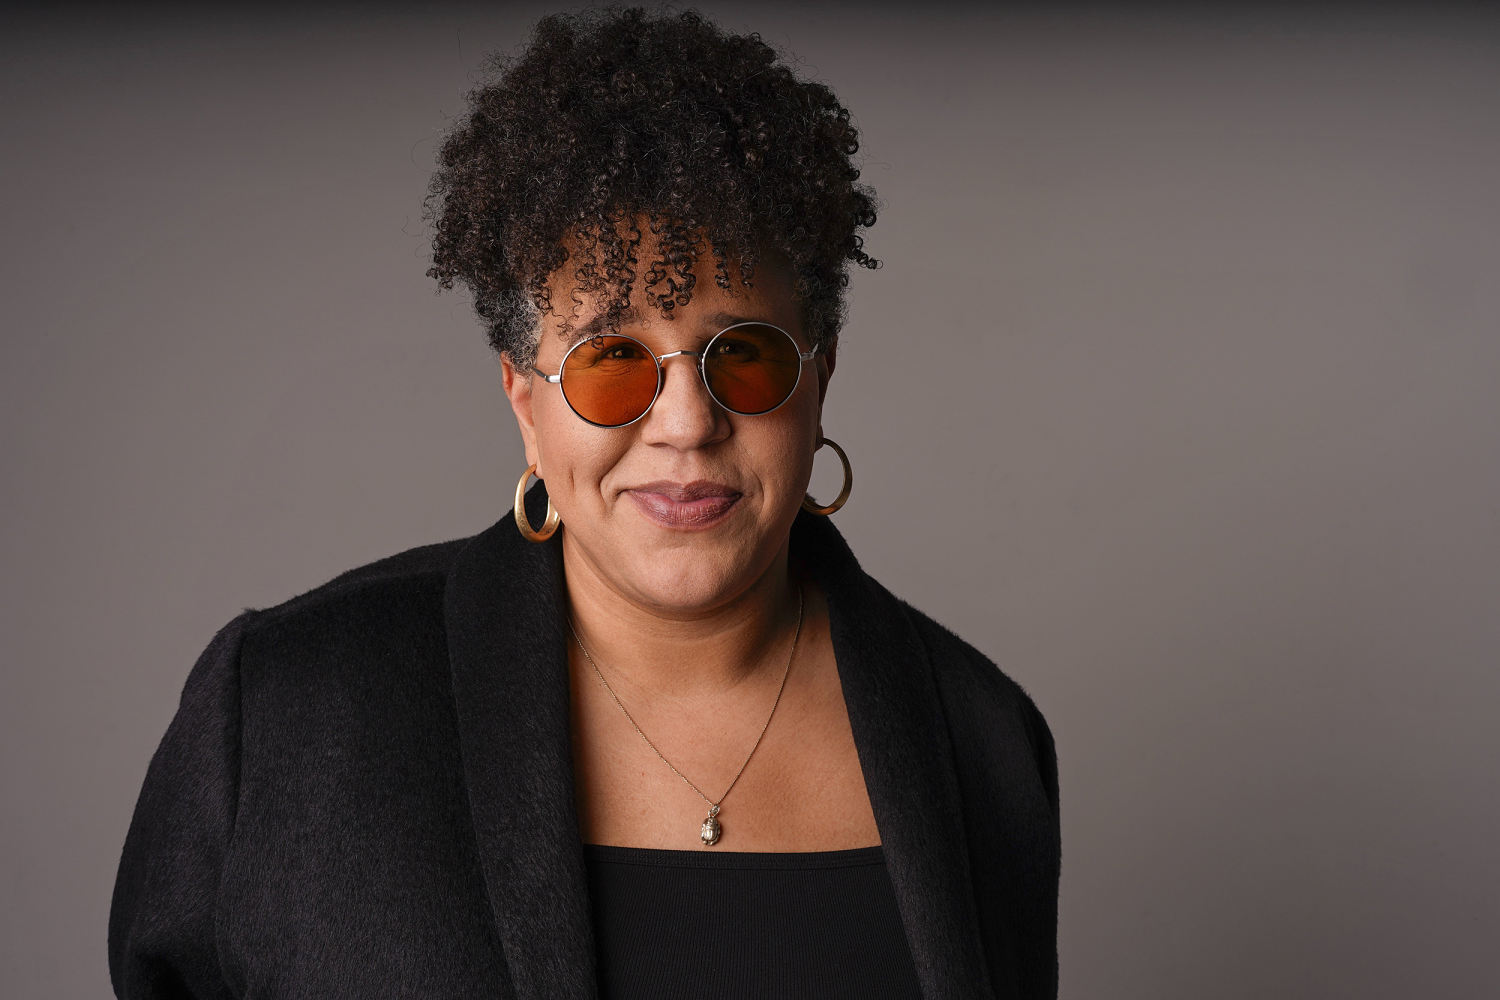 Brittany Howard's new album mixes genres, ethereal sounds and plenty of soul bearing